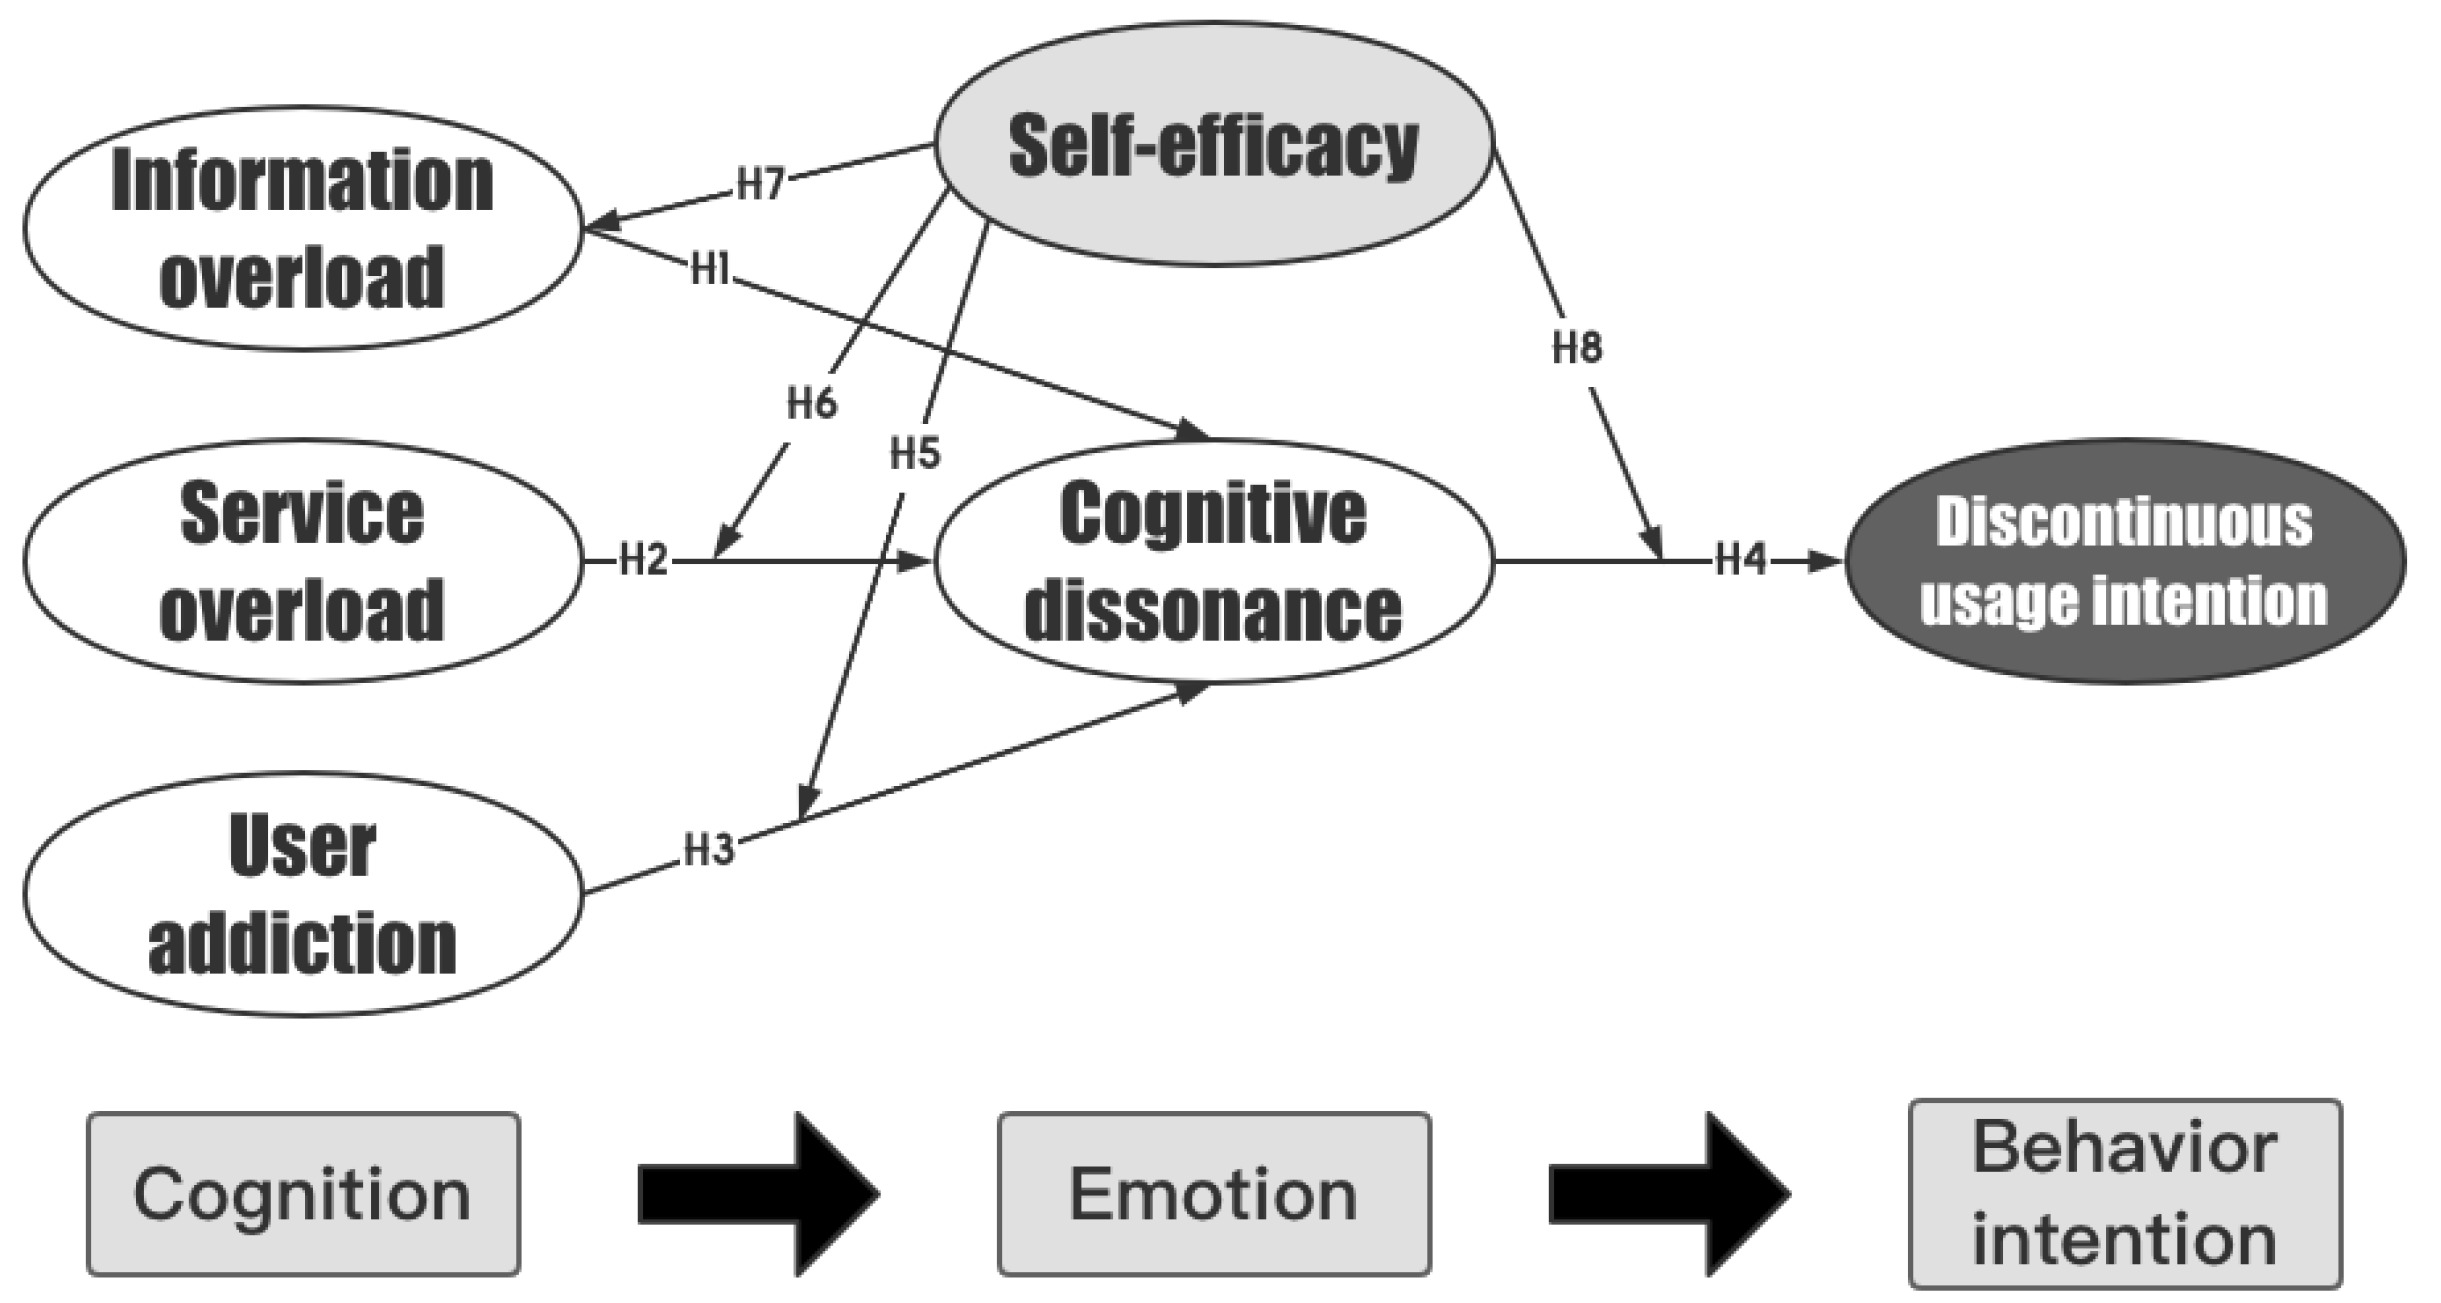 Behavioral Sciences Free Full-Text Mind over Matter Examining the Role of Cognitive Dissonance and Self-Efficacy in Discontinuous Usage Intentions on Pan-Entertainment Mobile Live Broadcast Platforms picture picture